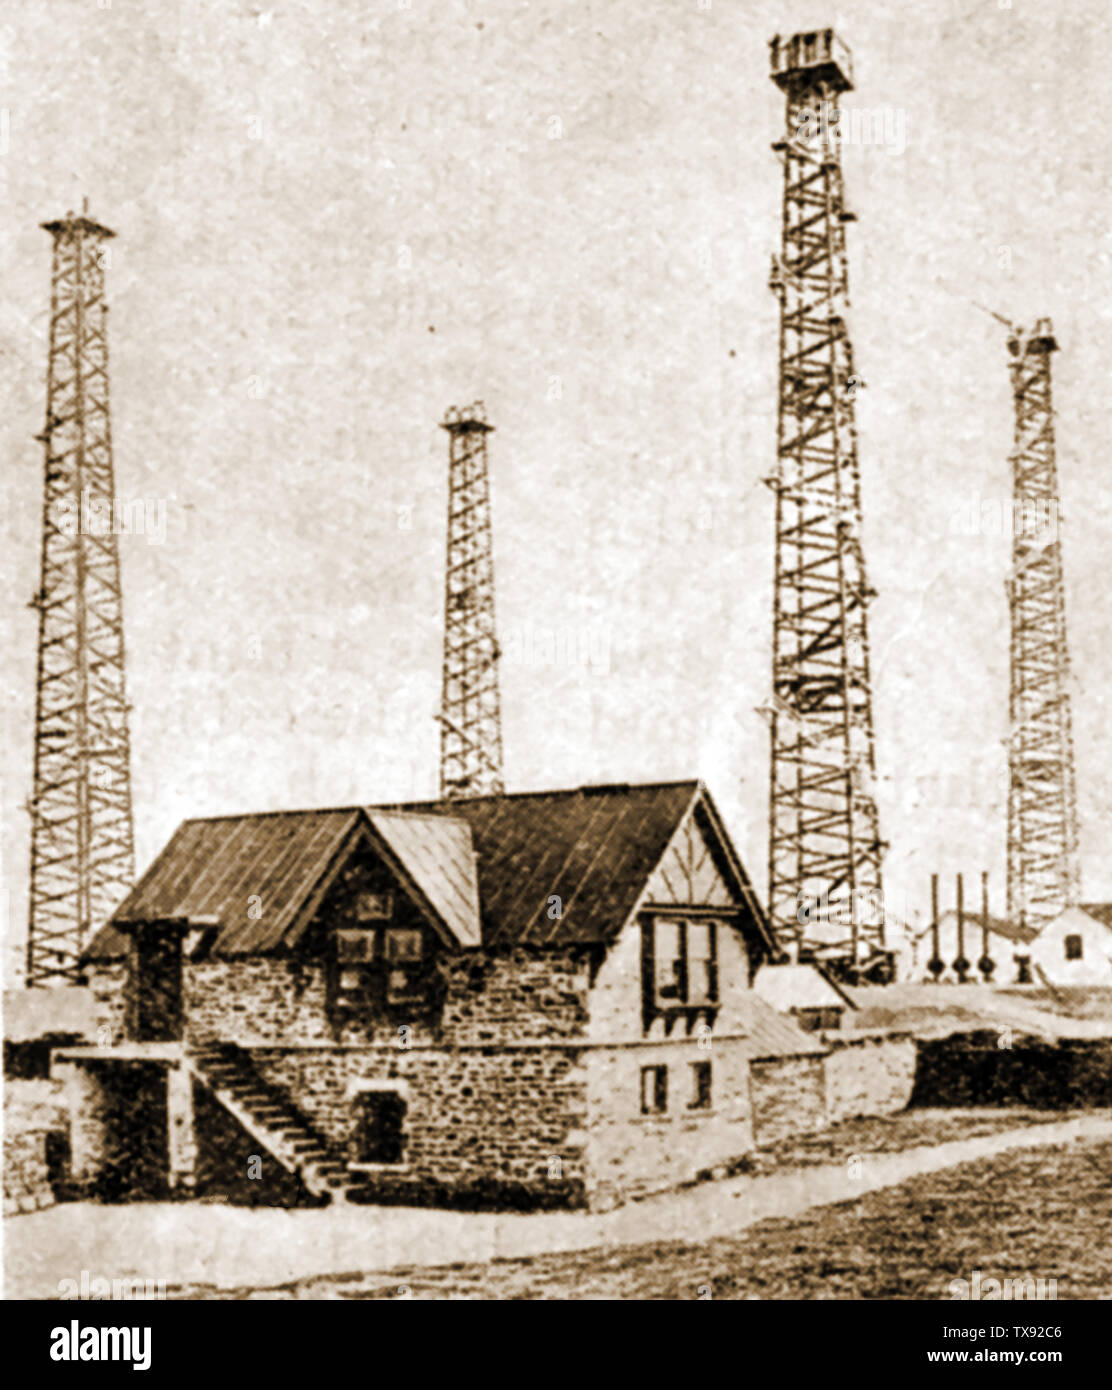 History of wireless and radio communication - History of wireless and radio communication -  THE EARLIEST POLDHU WIRELESS STATION  WITH ITS WOODEN MASTS Stock Photo